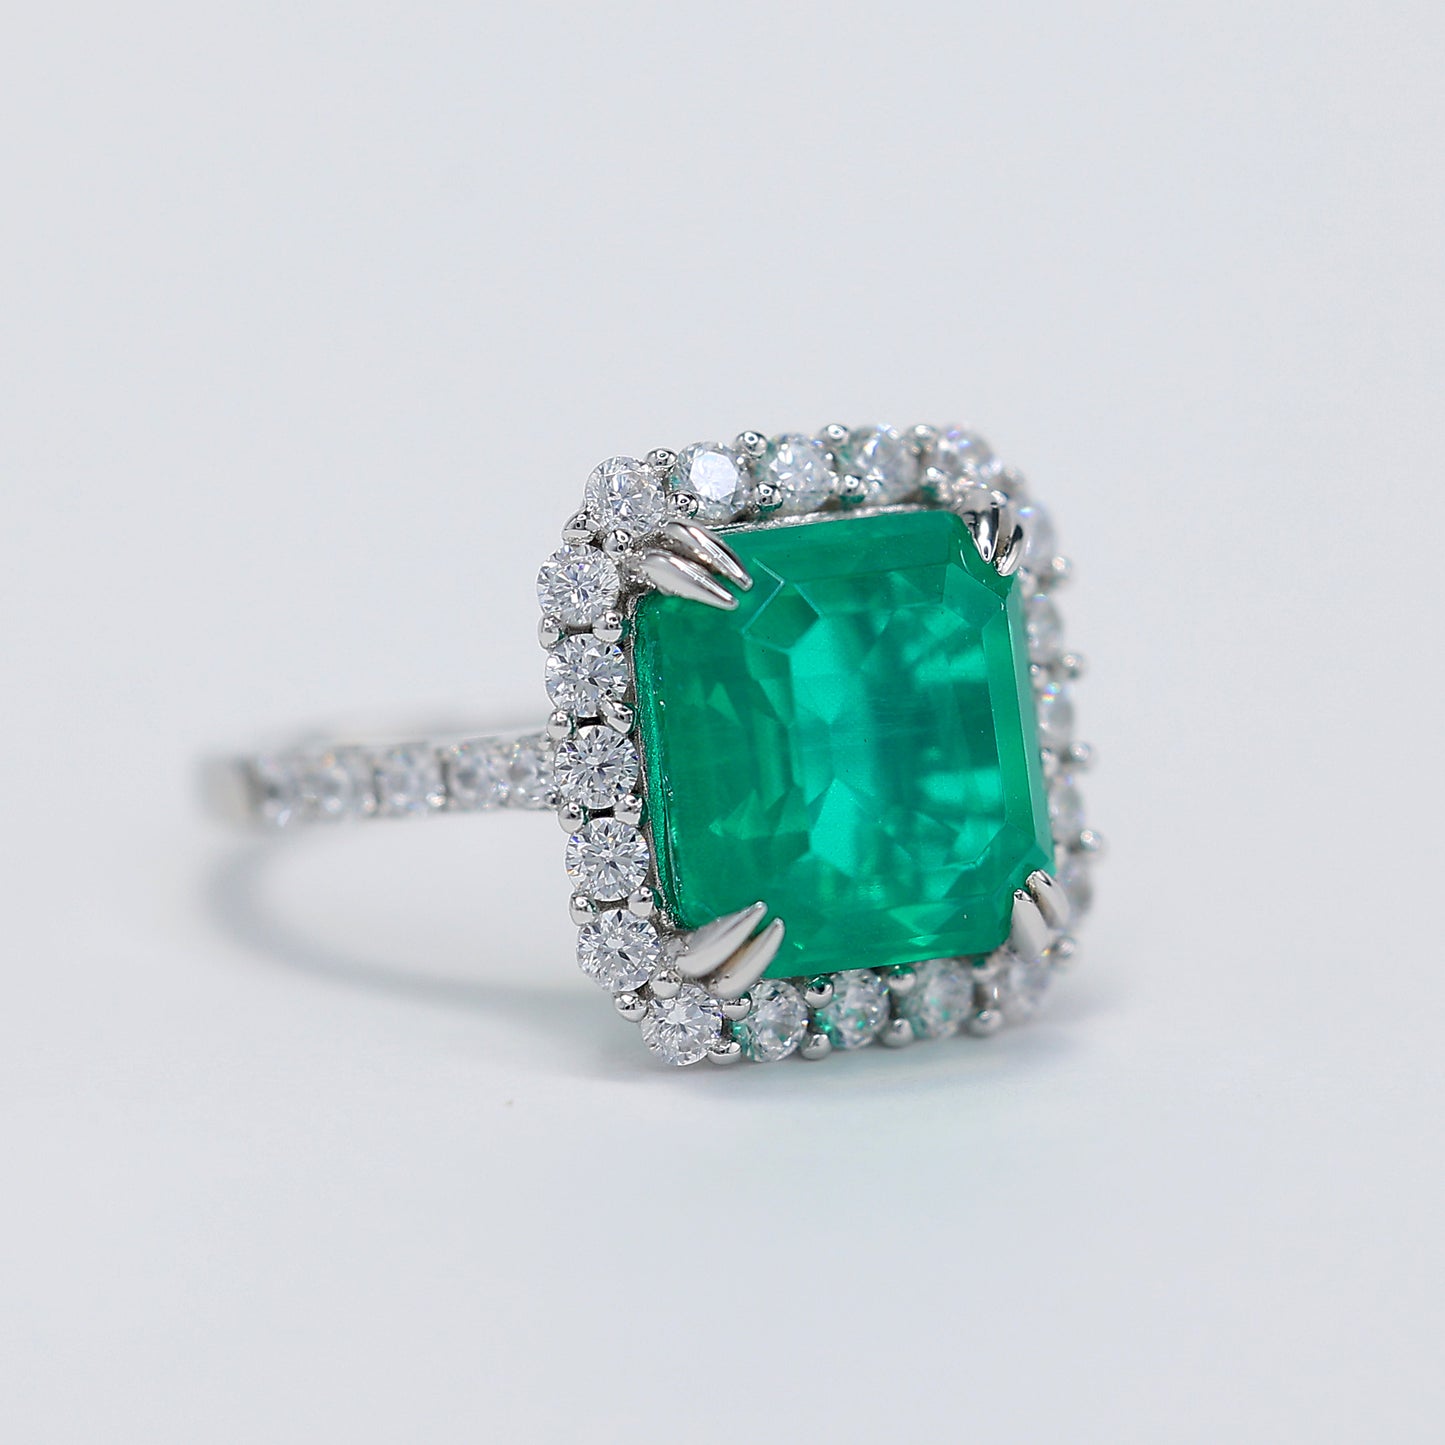 Promotion design Micro-setting Emerald color Lab created stones 8 prong ring, sterling silver. (5.45 carat)